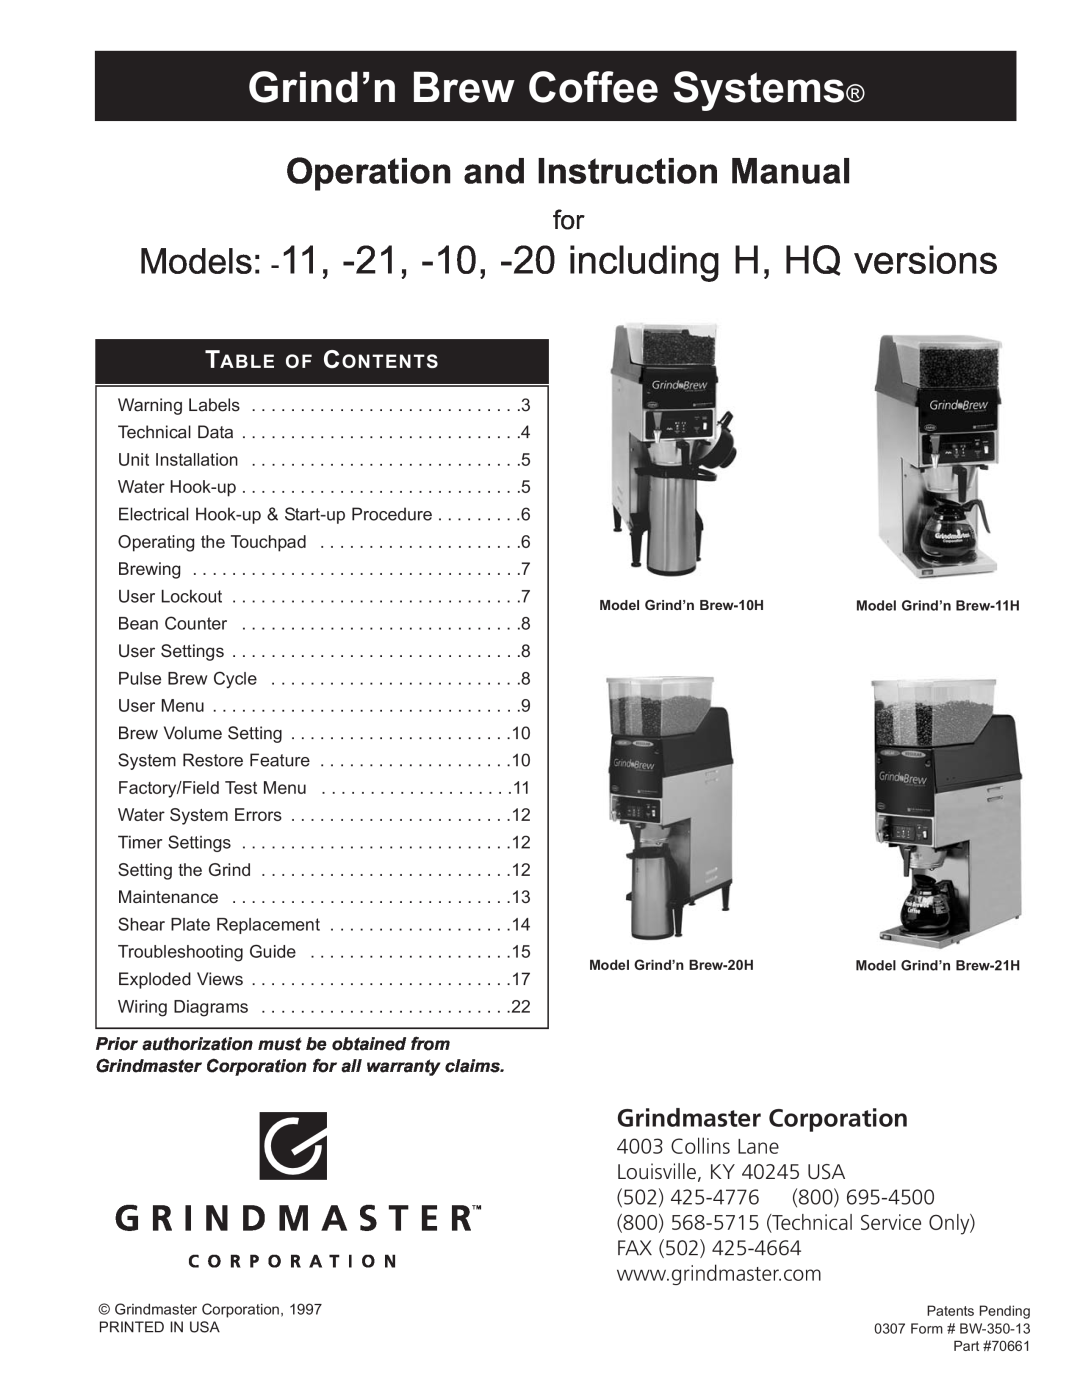 Grindmaster 11 instruction manual Grindmaster Corporation, Collins Lane Louisville, KY 40245 USA 502, Table Of Contents 